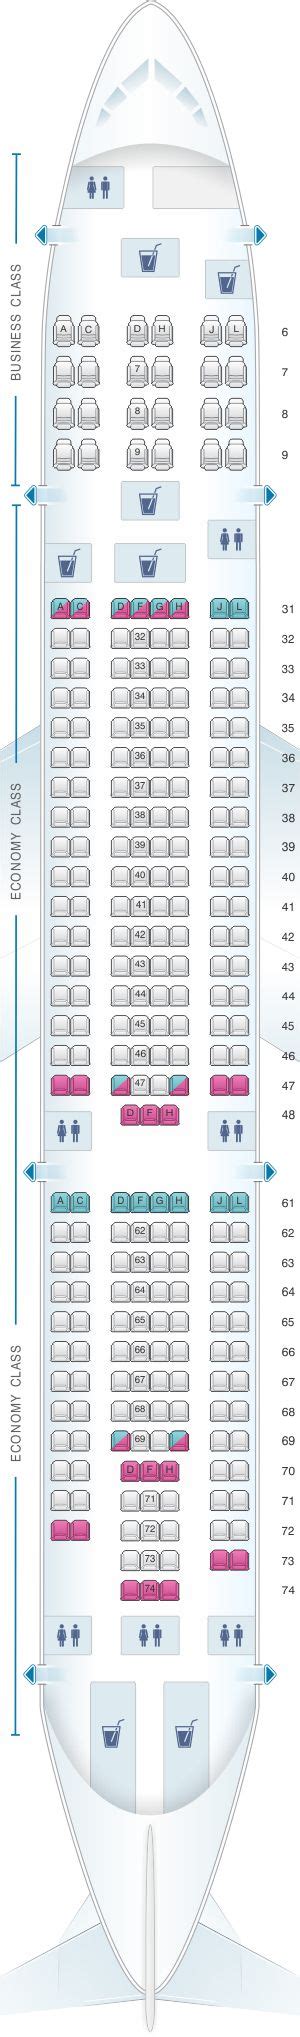 Seat Map China Eastern Airlines Airbus A330 200 Config1 Hawaiian